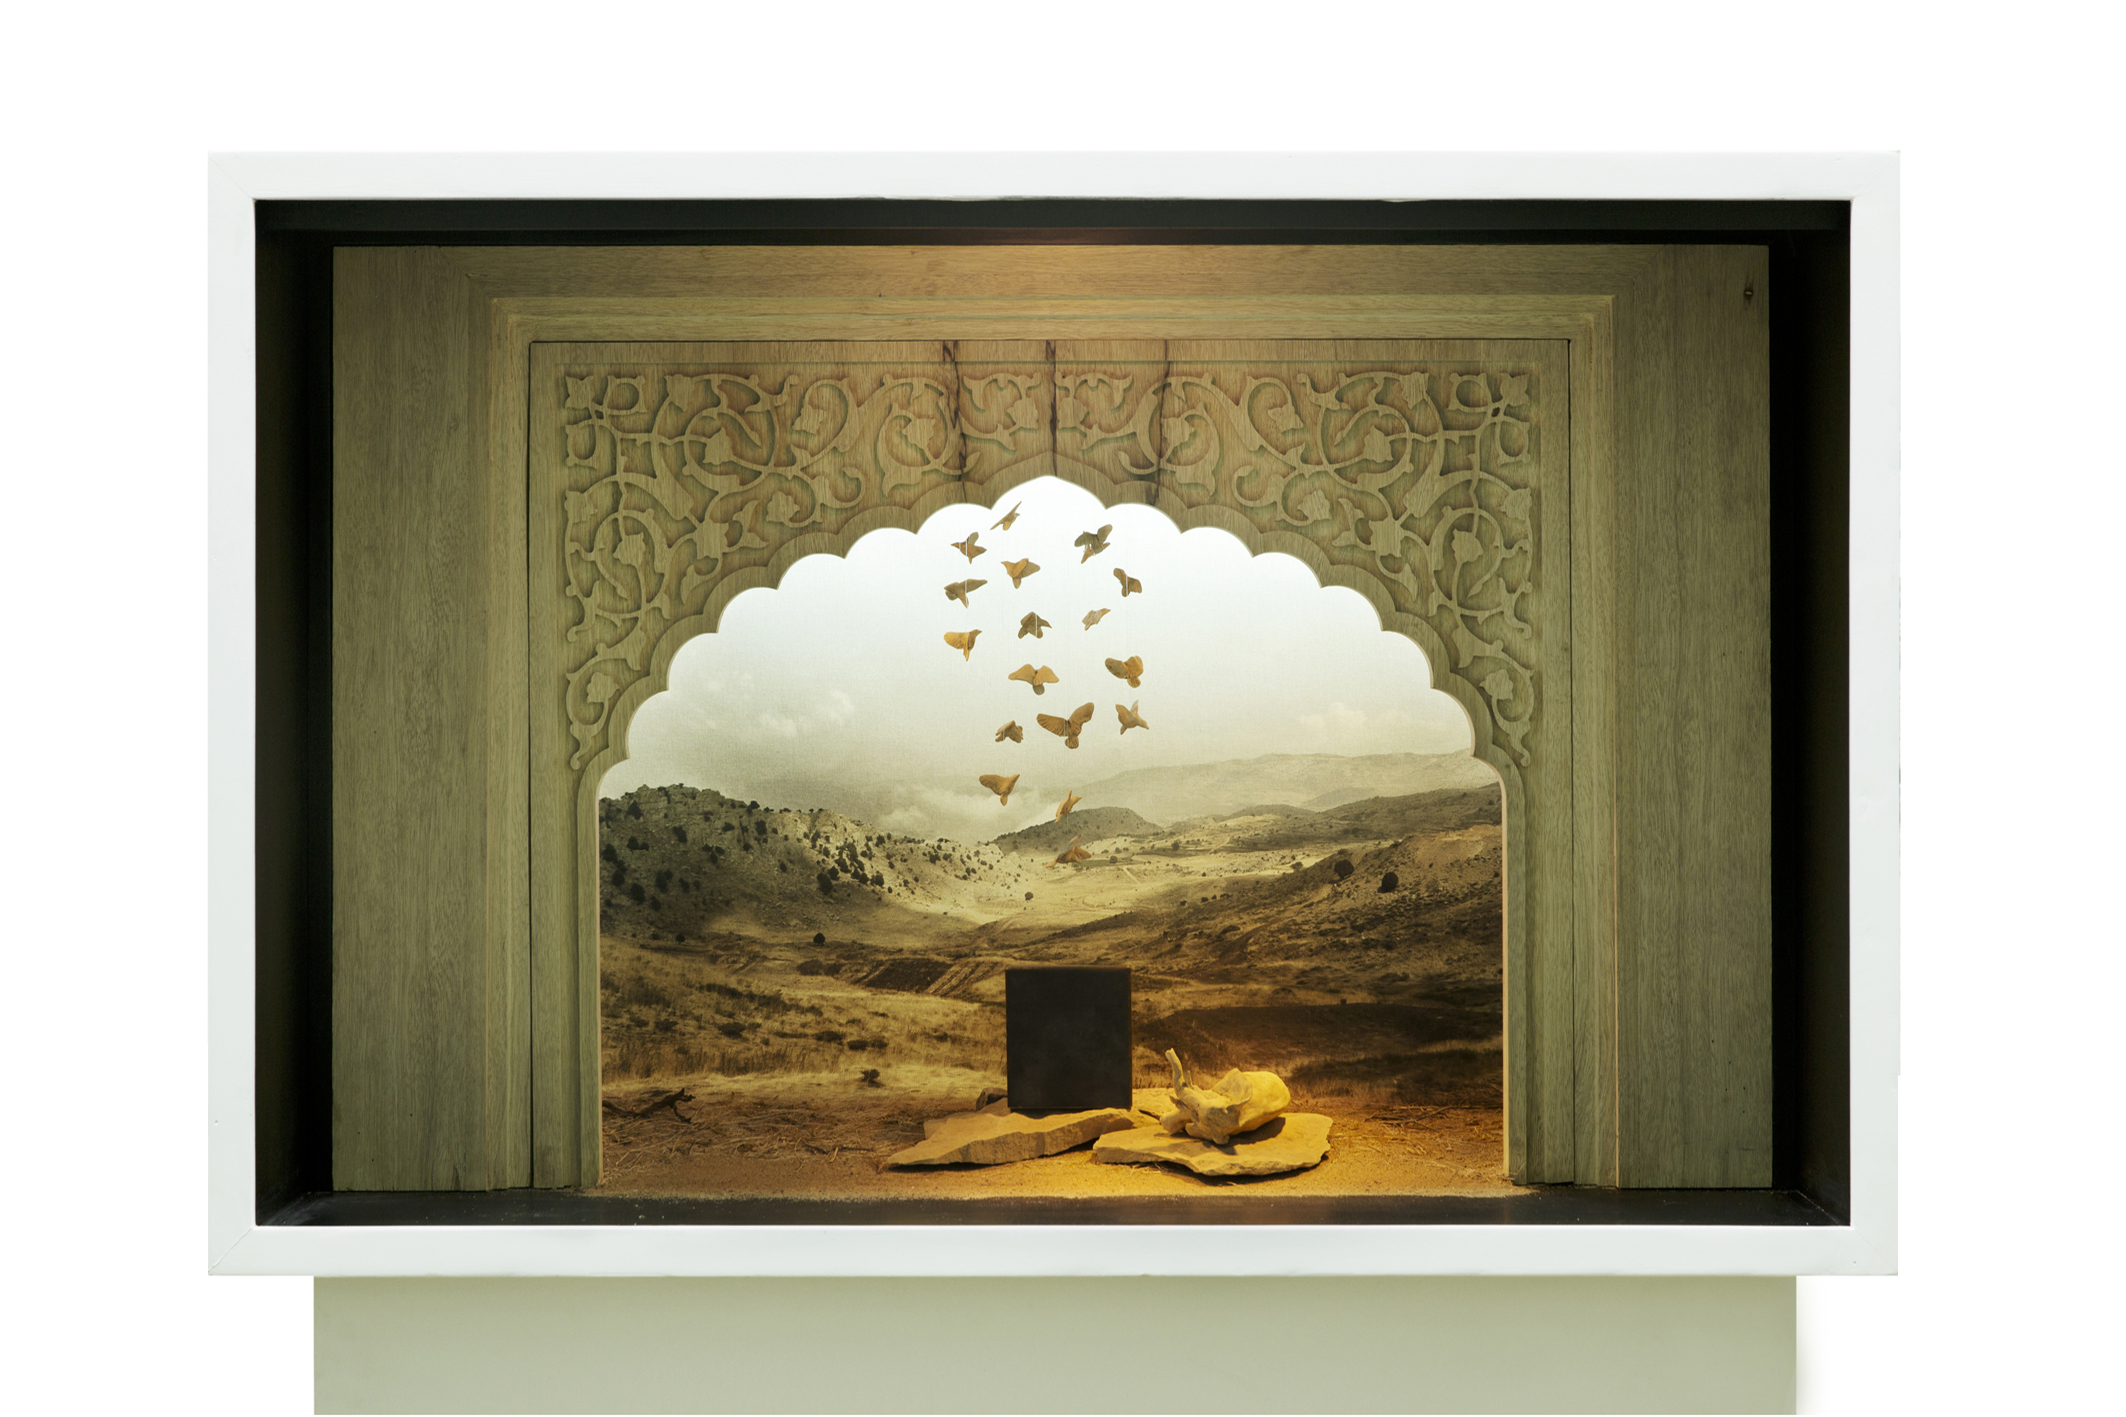 Randa Mirza. The year of the elephant, 2014. Selection from the series, El-Zohra was not born in a day. Diorama with mixed media, 105cm x 70cm x 75 cm. Courtesy Randa Mirza. © Randa Mirza.